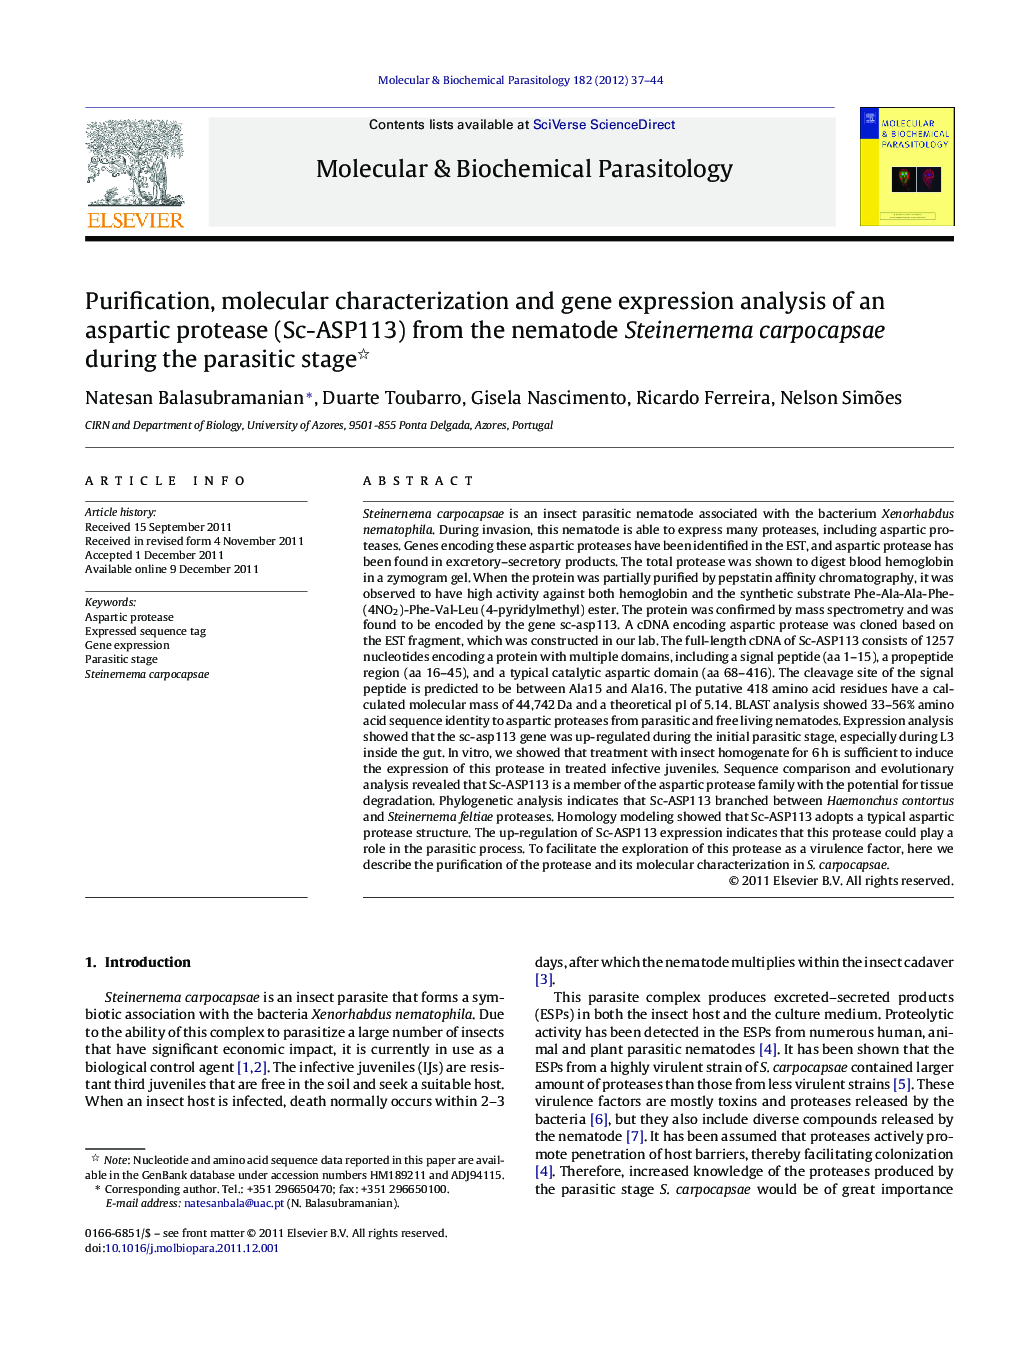 Purification, molecular characterization and gene expression analysis of an aspartic protease (Sc-ASP113) from the nematode Steinernema carpocapsae during the parasitic stage 